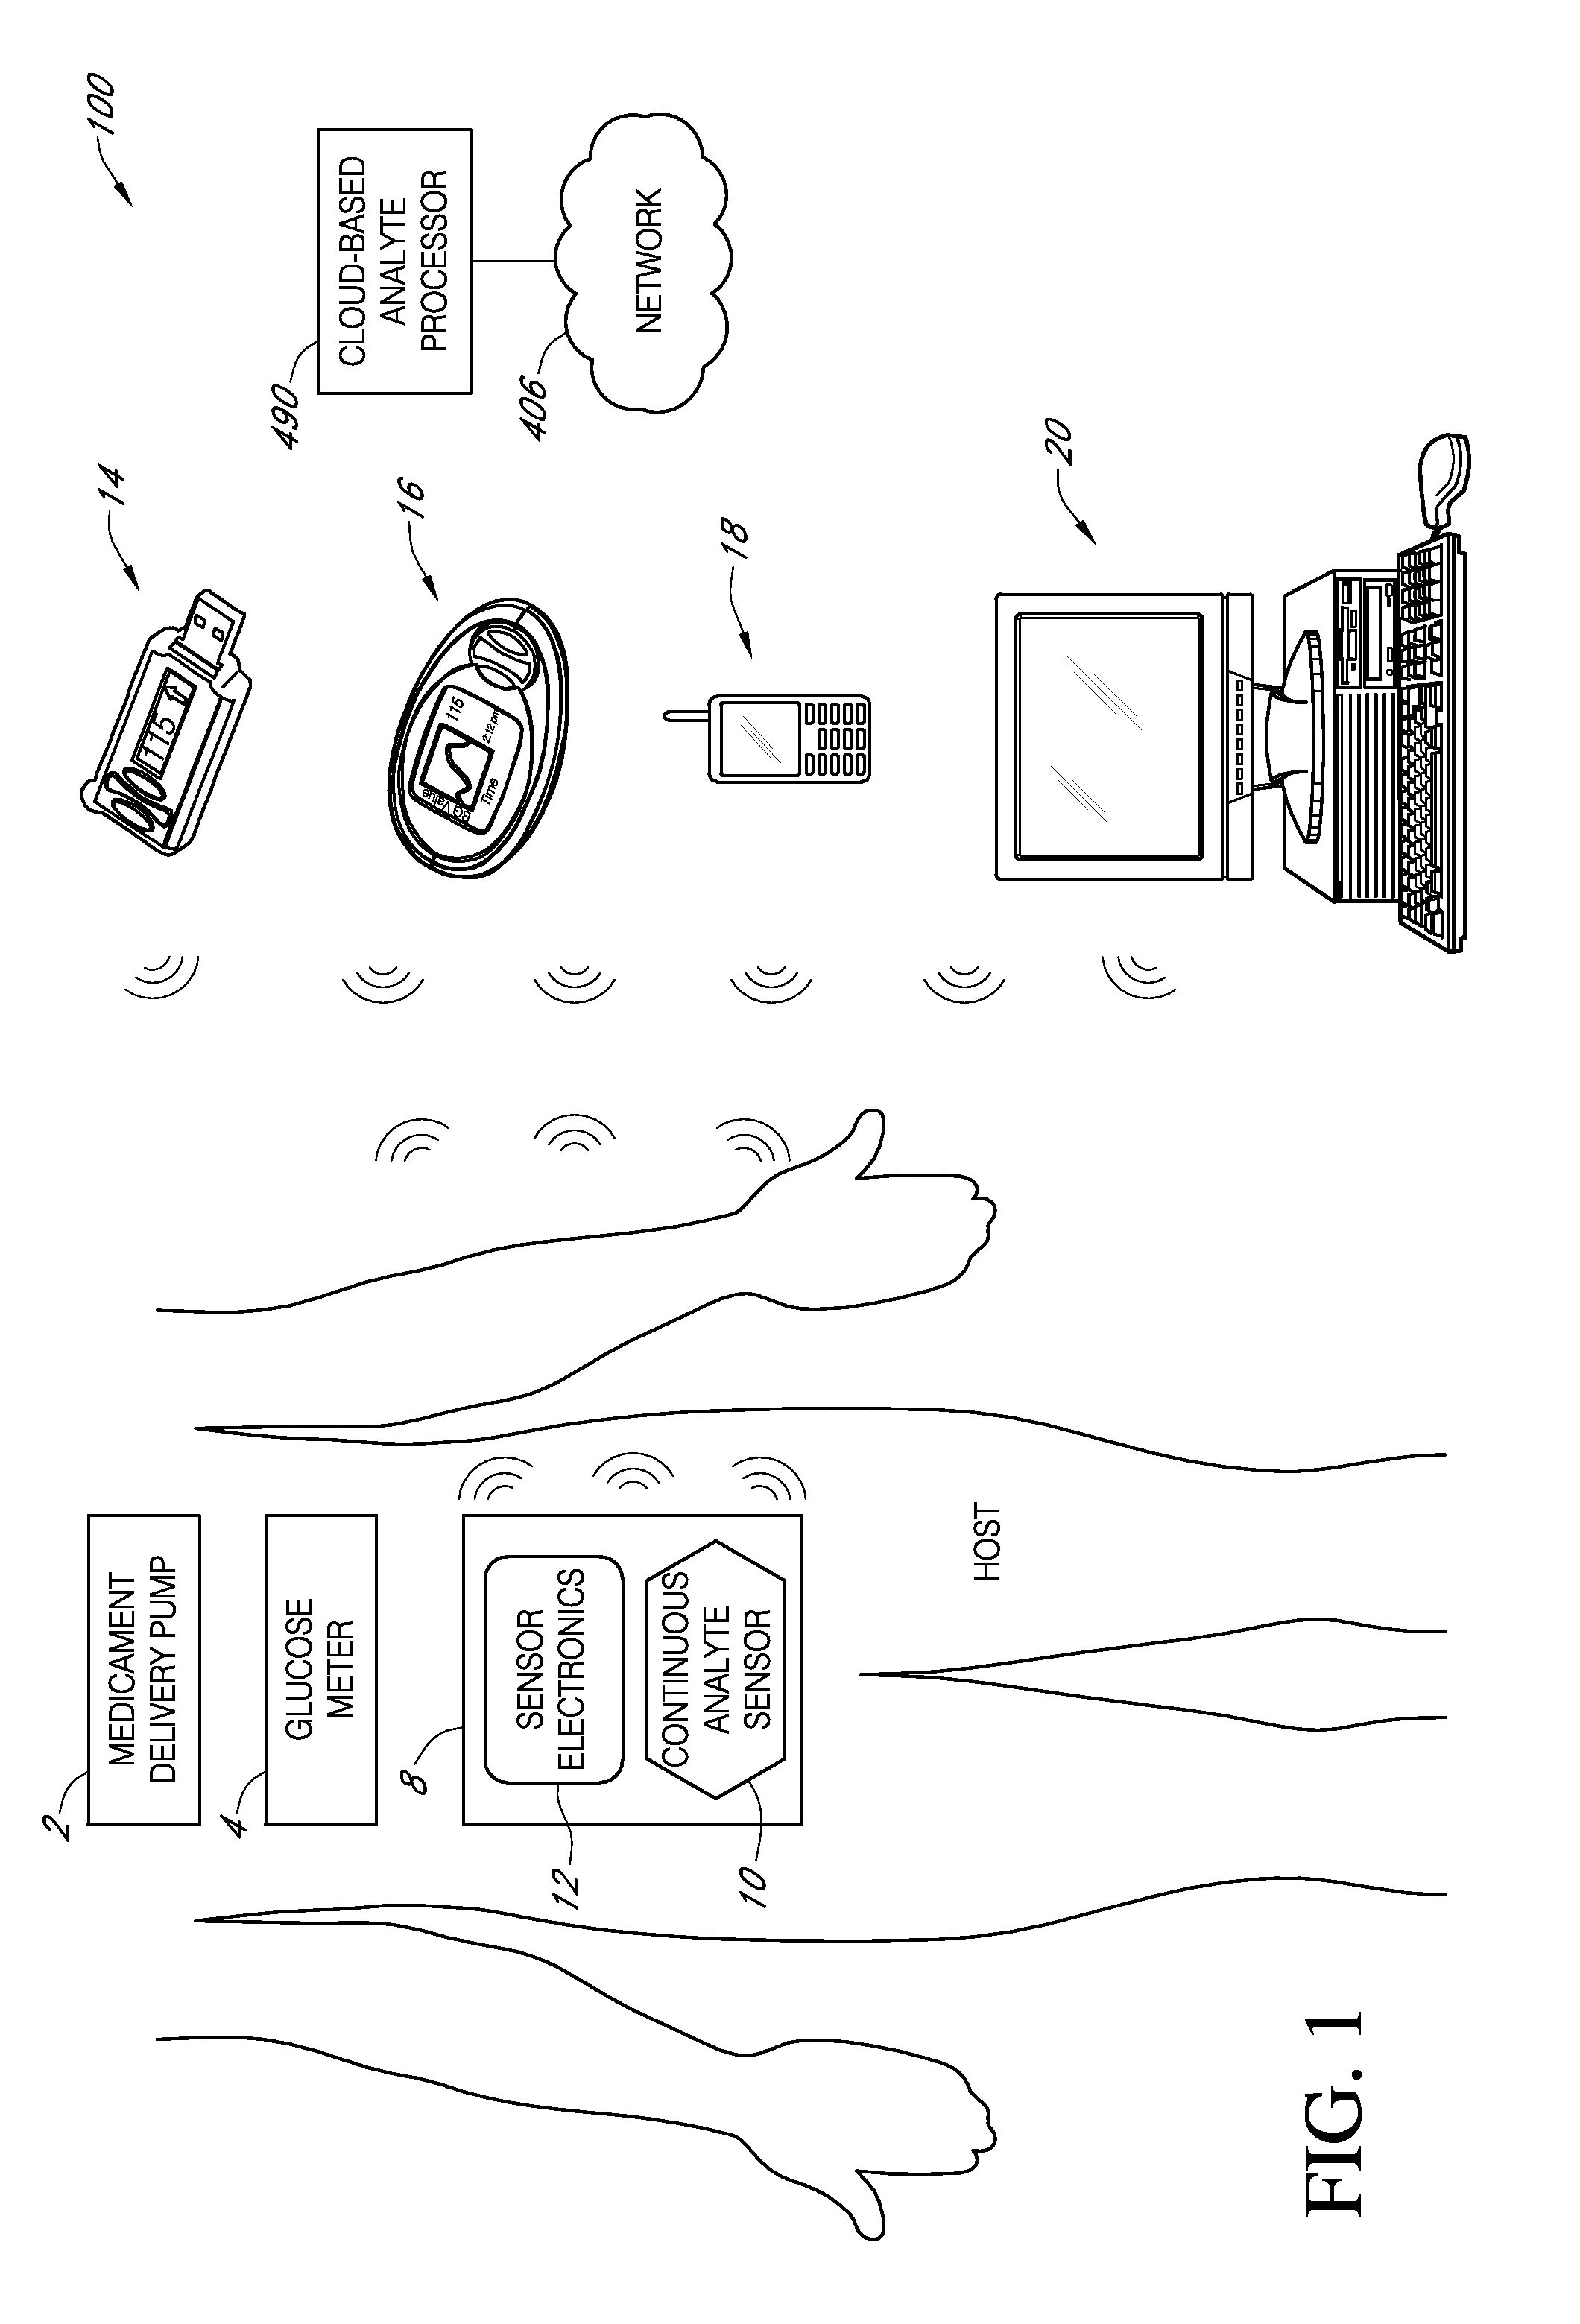 Systems and methods for dynamically and intelligently monitoring a host's glycemic condition after an alert is triggered